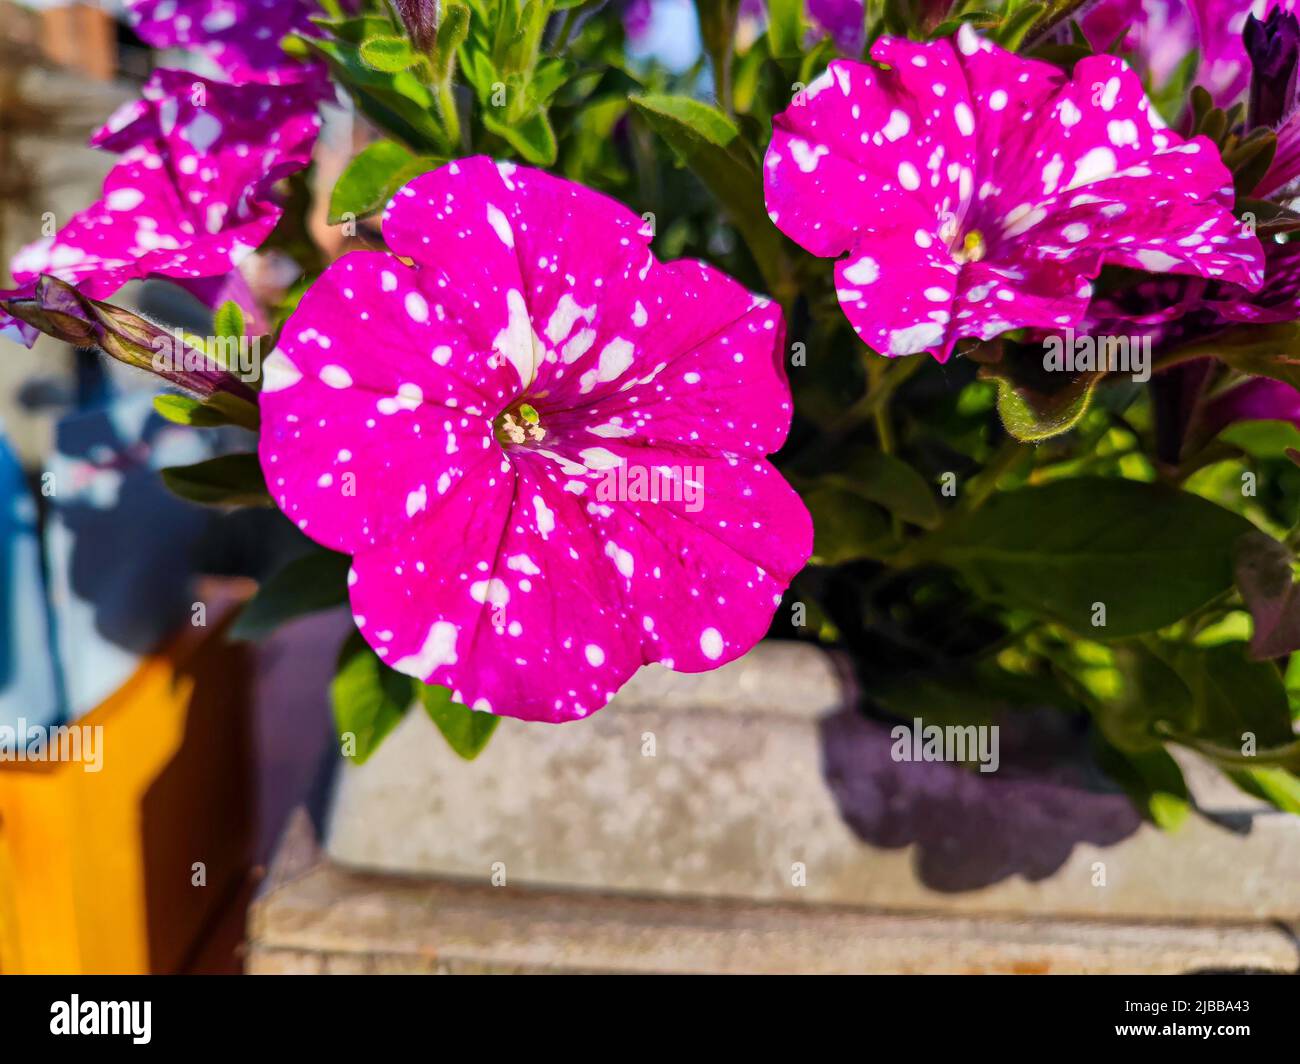 Pink purple Petunia Atkinsiana flower with White spots and dots close up. A beautiful plant / flower in a park / garden. Stock Photo